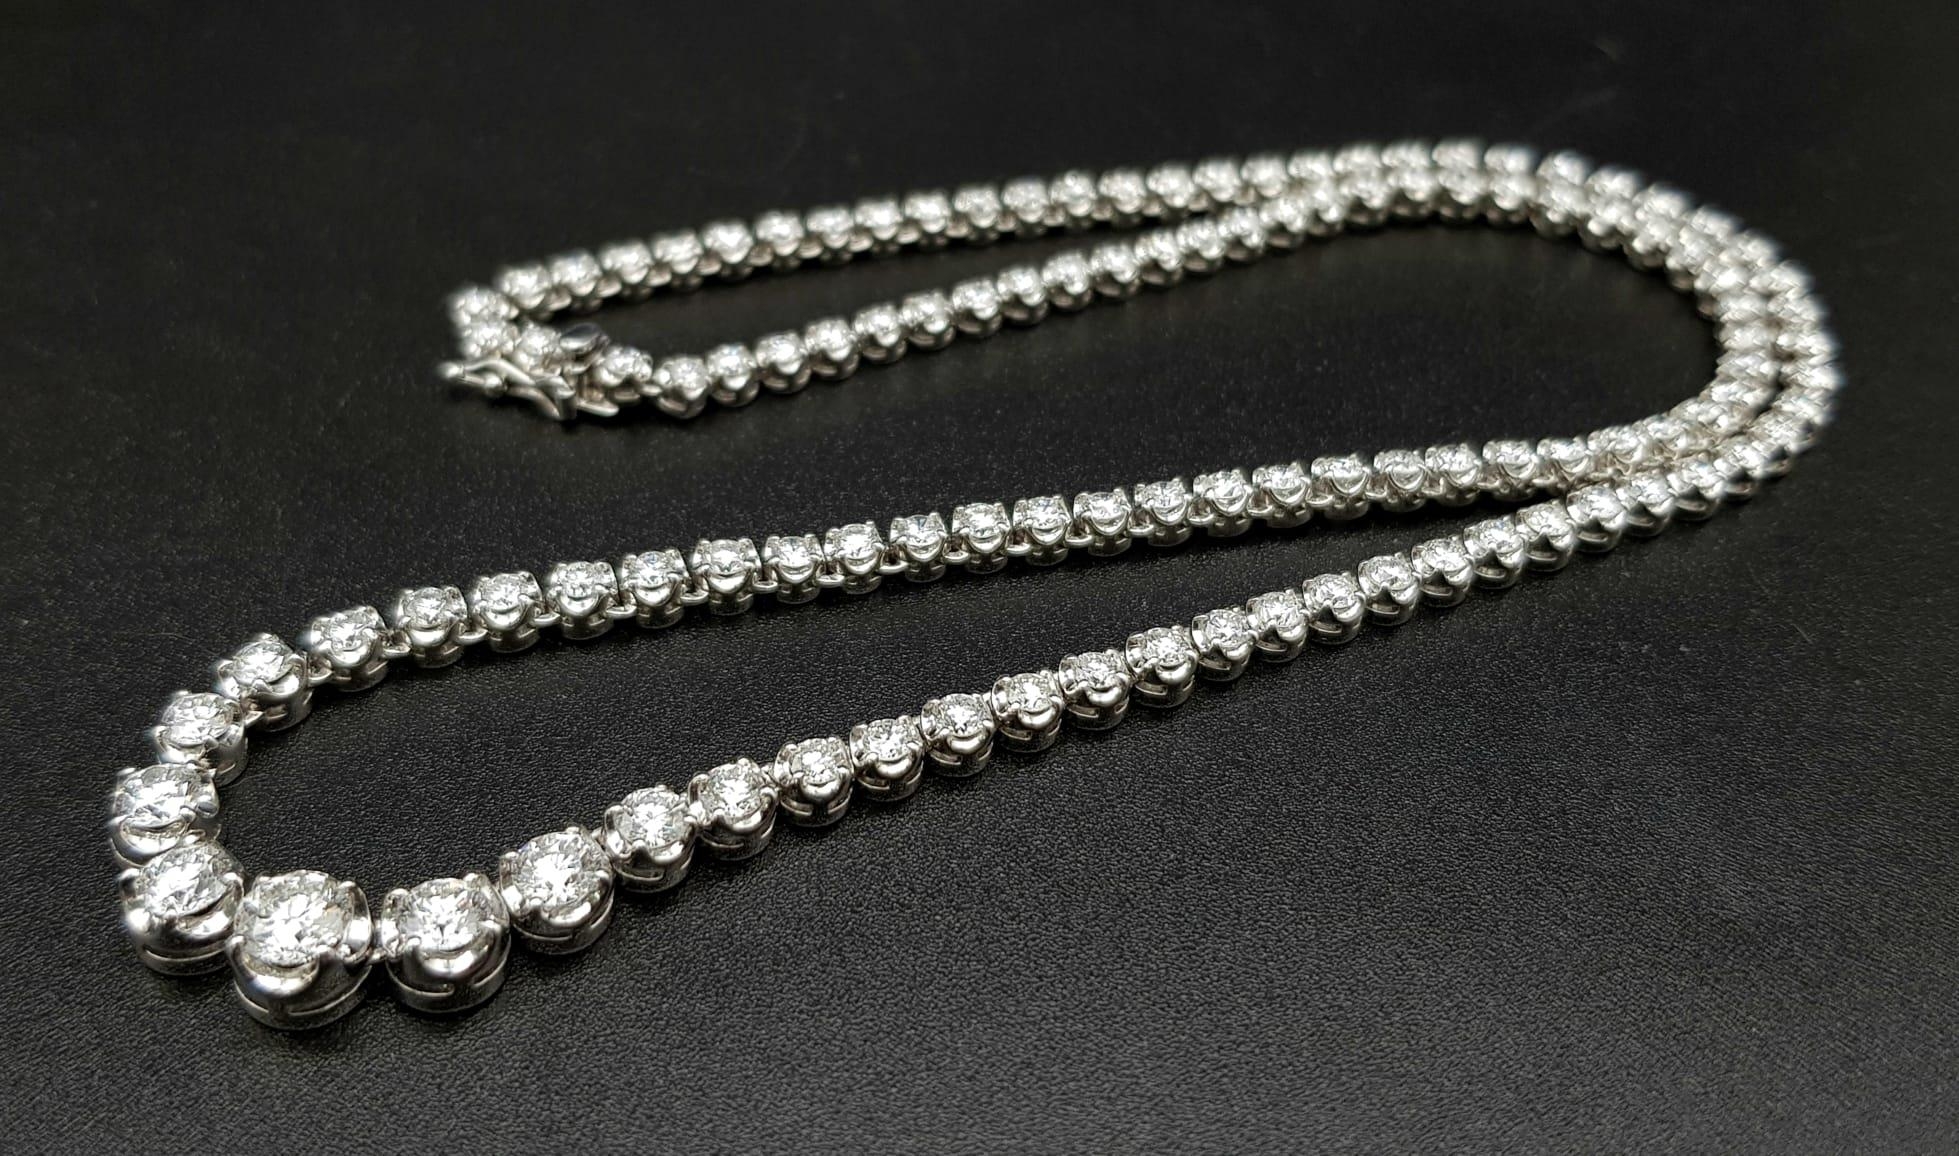 18k White Gold Necklace. 36.9g with 10ct Diamonds, absolutely stunning piece of jewellery. - Image 4 of 7